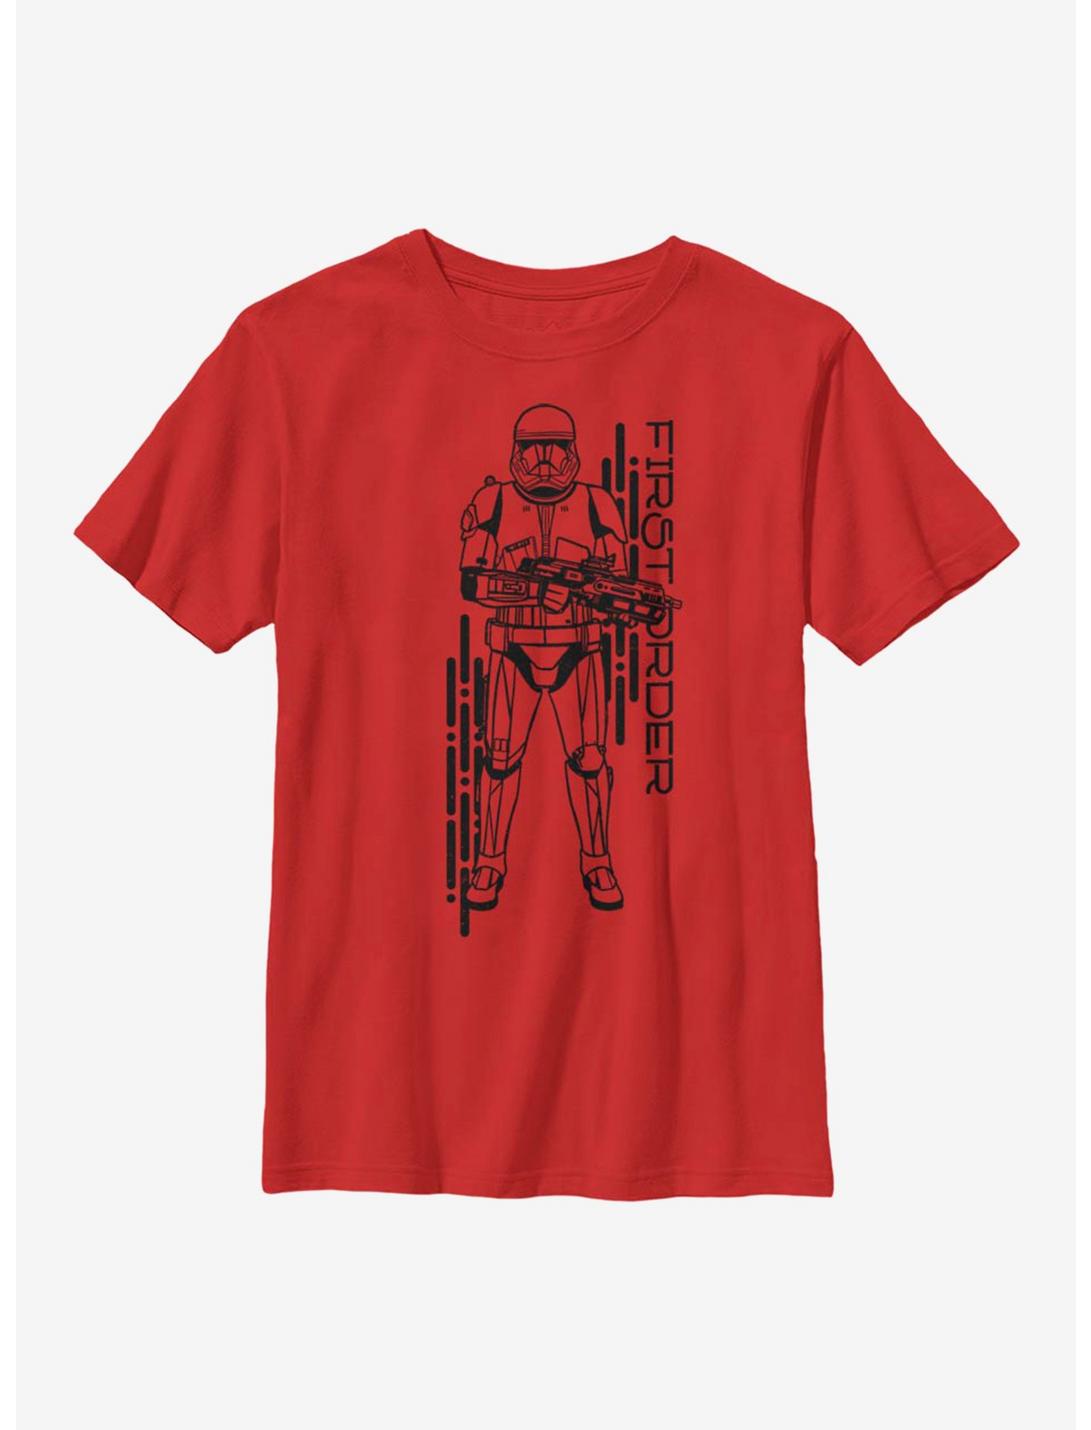 Star Wars Episode IX The Rise Of Skywalker Project Red Youth T-Shirt, RED, hi-res